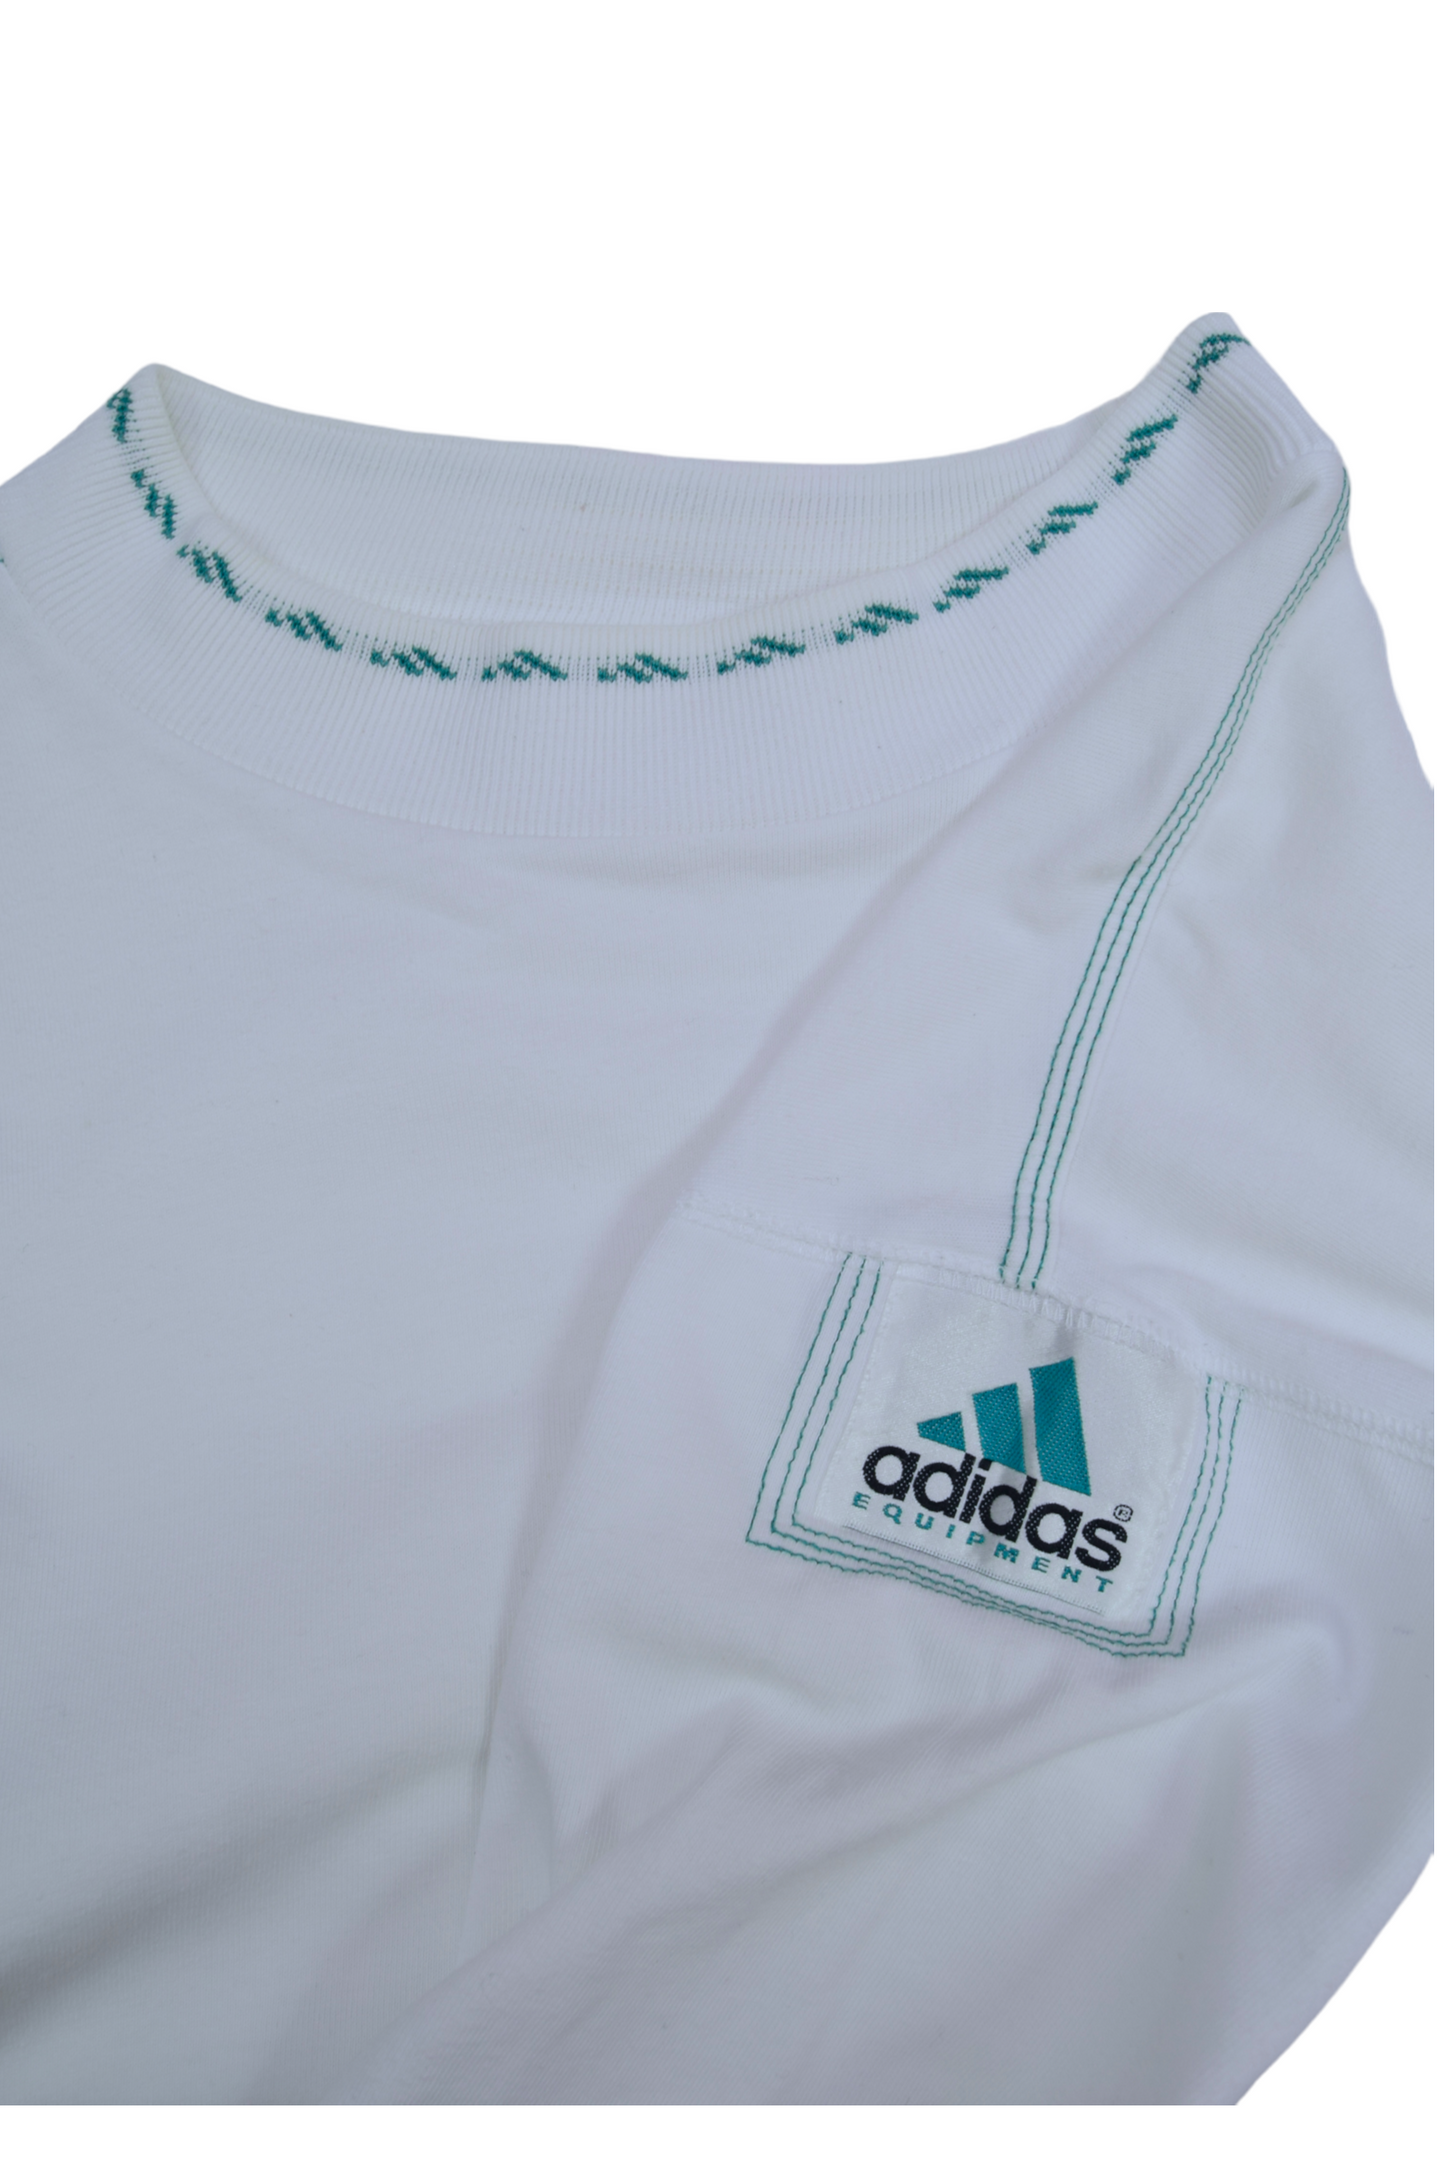 Vintage 90's Adidas Equipment T-Shirt Size M White 100% Cotton Made in Hong Kong